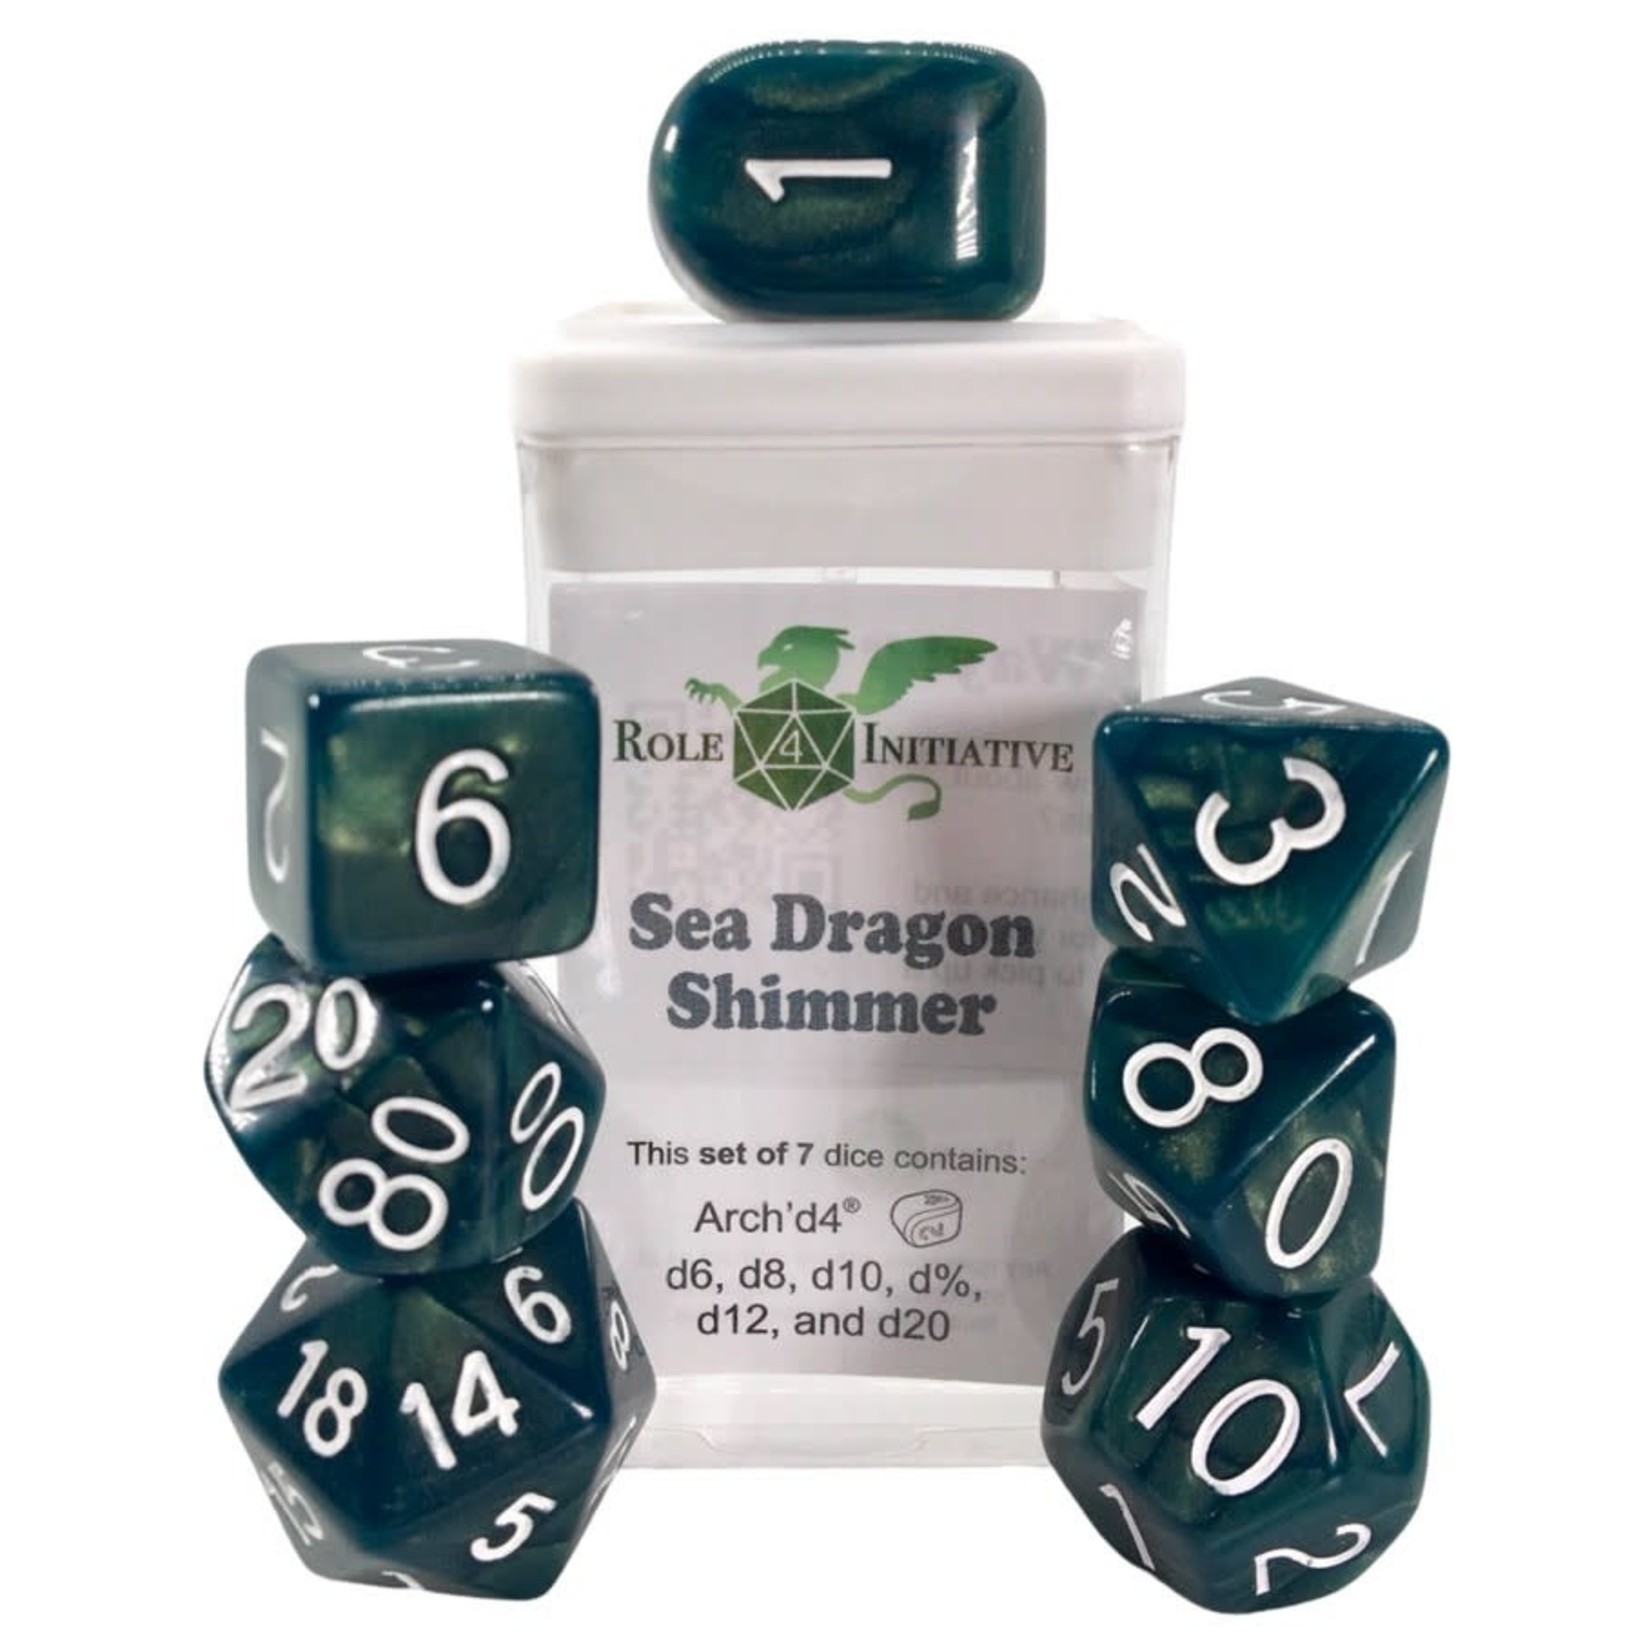 Role 4 Initiative Set of 7 with Arch'd4 Sea Dragon Shimmer